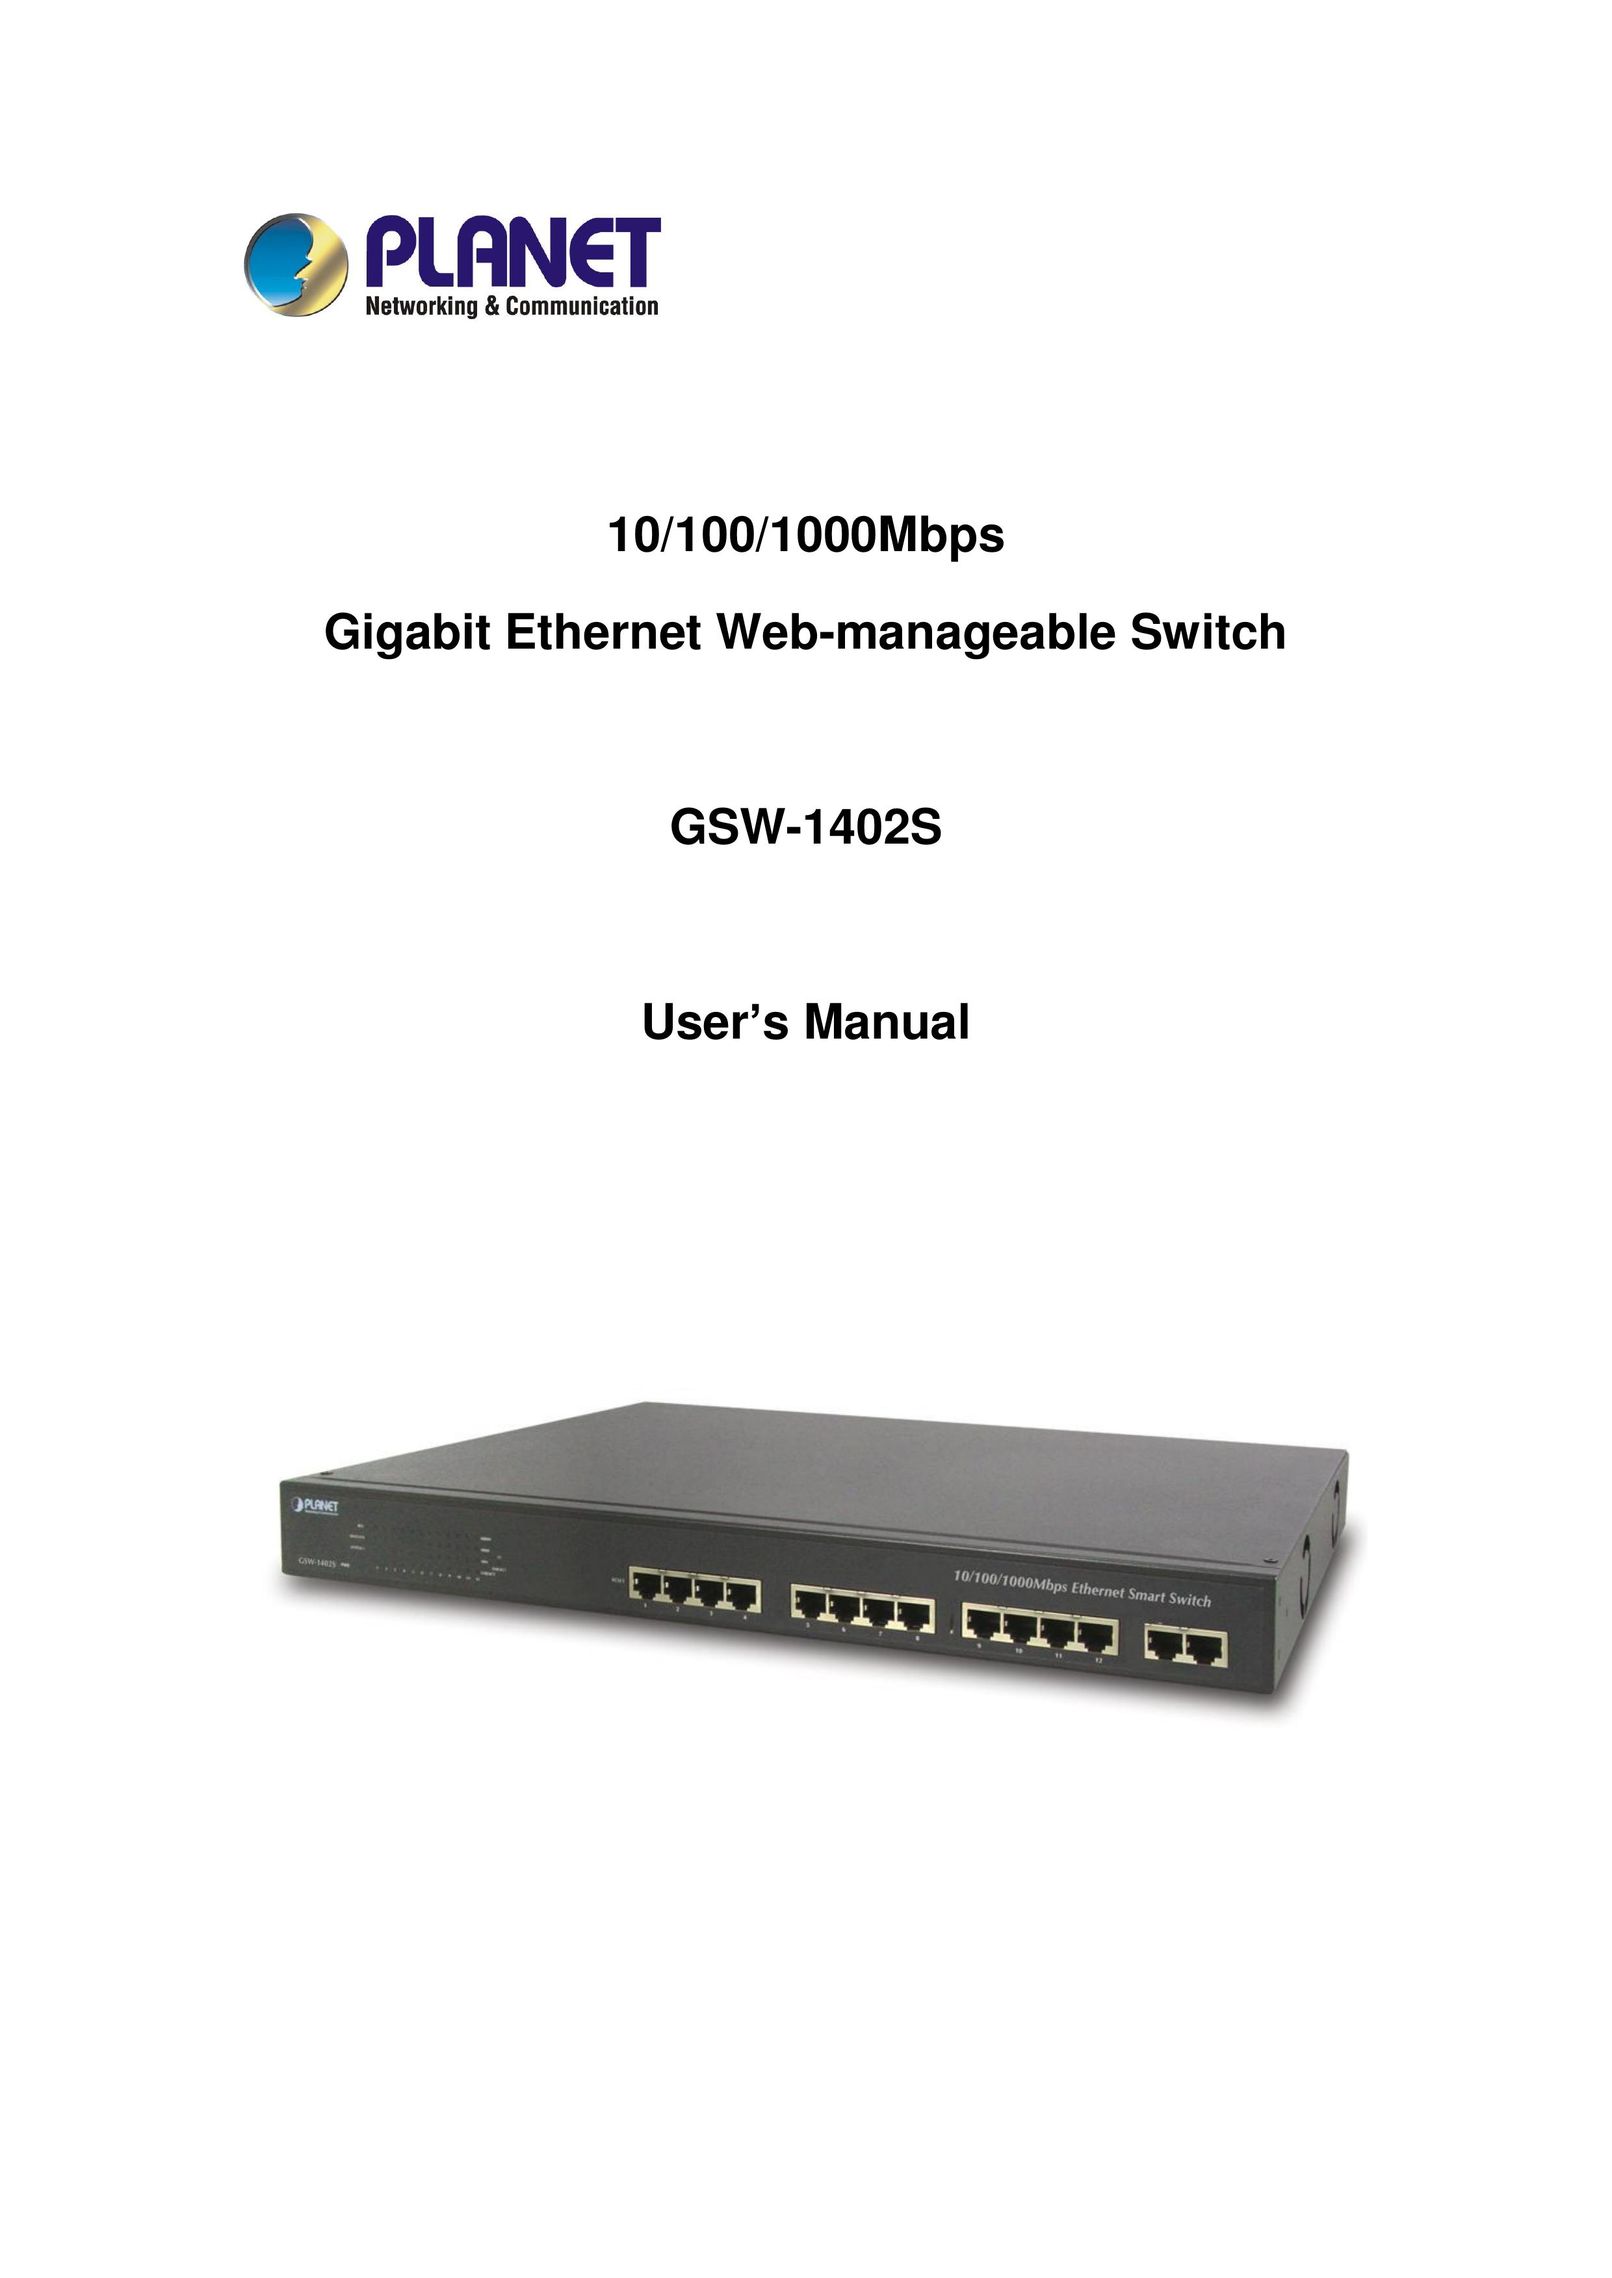 Planet Technology 10/100/1000Mbps Gigabit Ethernet Web-manageable Switch Switch User Manual